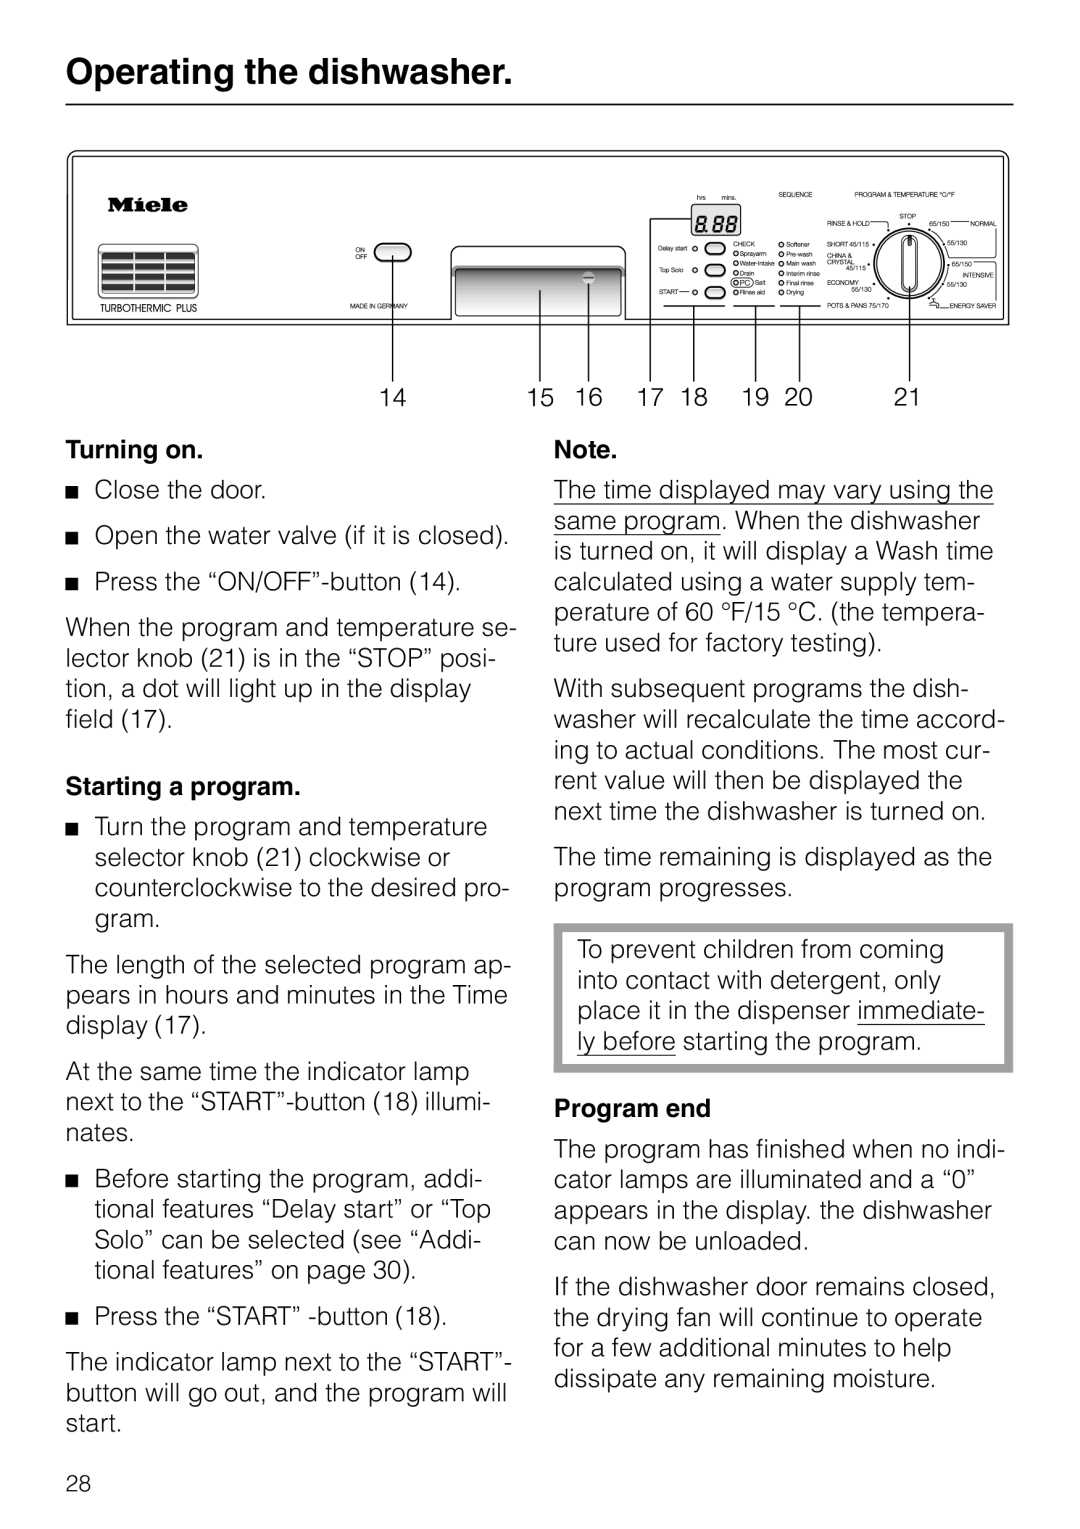 Miele M.-NR. 04 390 922 operating instructions Operating the dishwasher, Turning on, Starting a program, Program end 